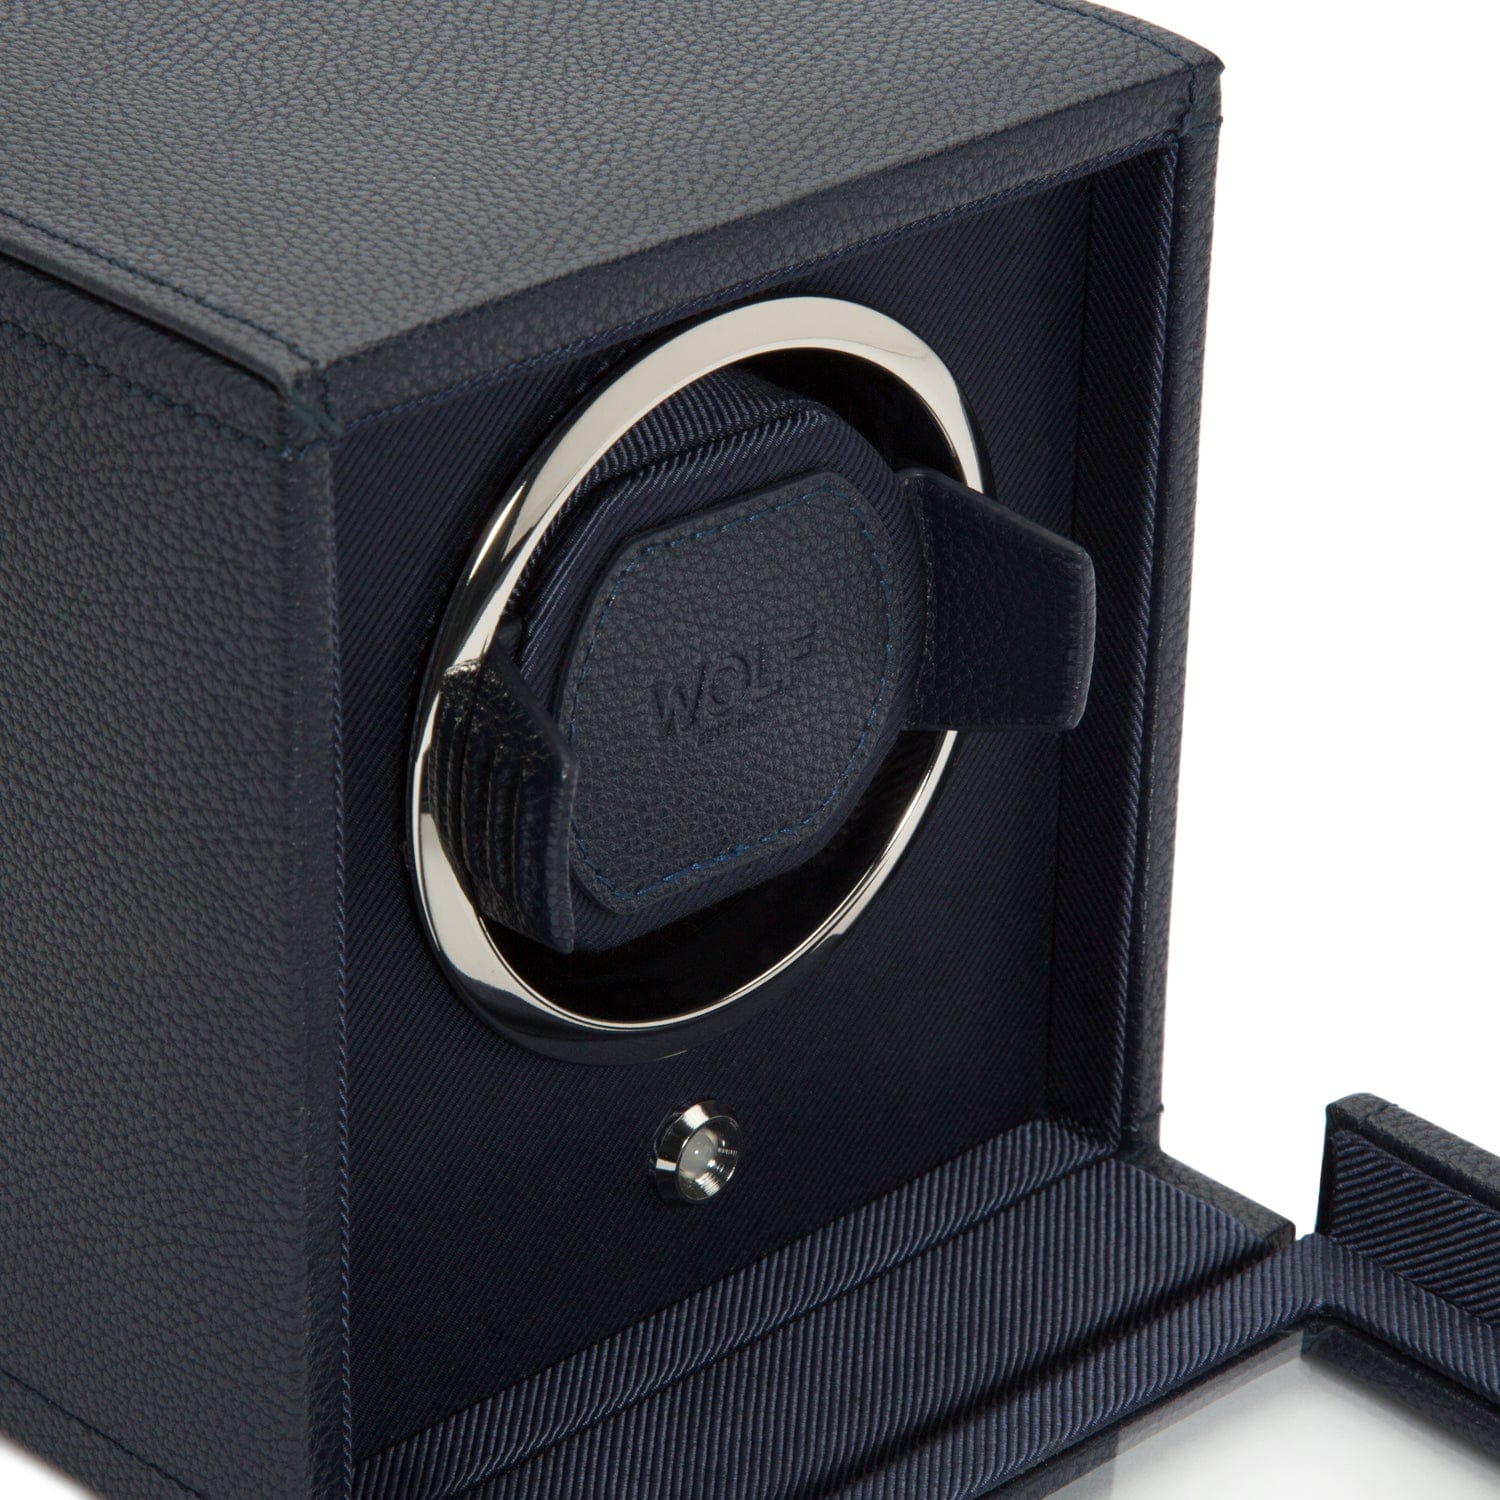 Wolf1834 Watch Winder Cub Single Watch Winder with Cover-Navy